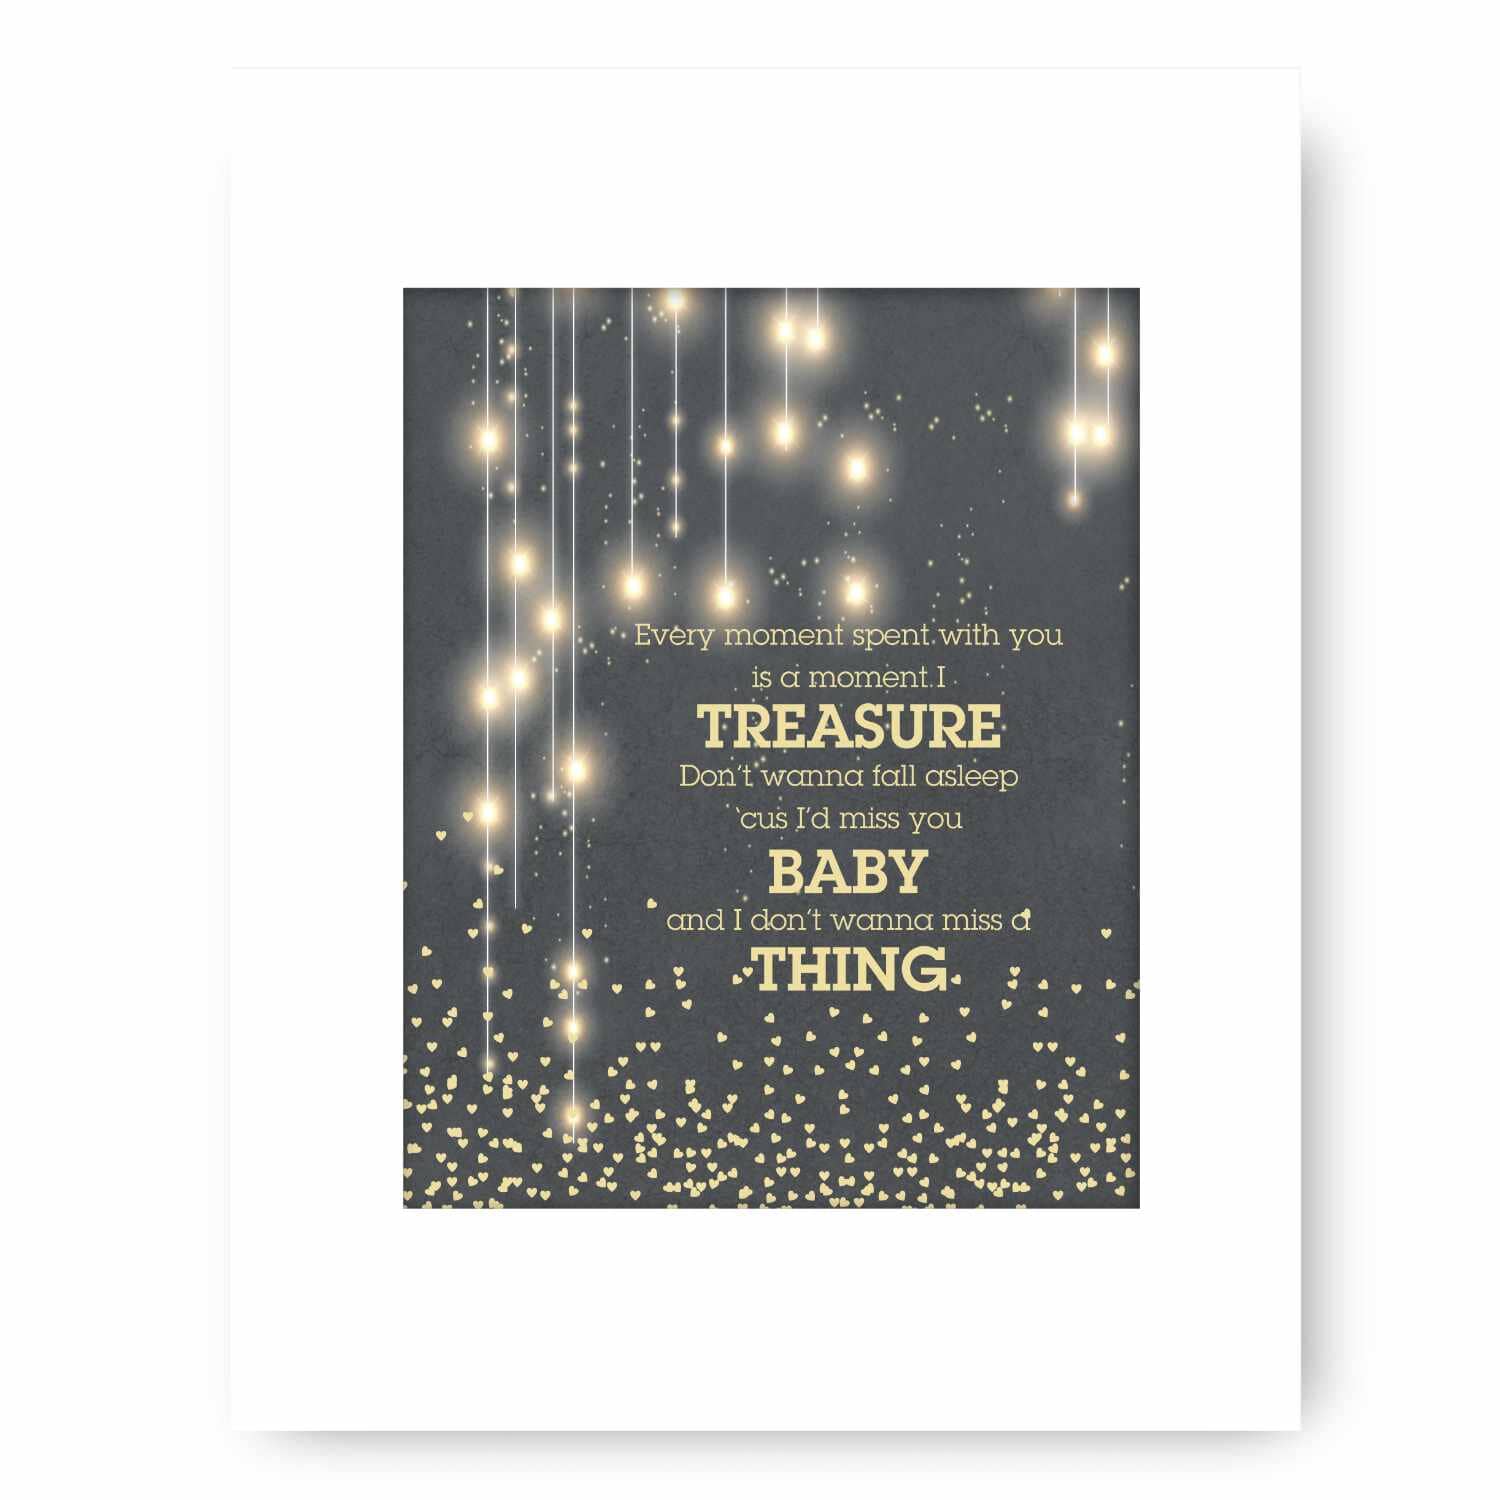 Don't Want to Miss a Thing by Aerosmith - Music Lyric Art Song Lyrics Art Song Lyrics Art 8x10 White Matted Print 